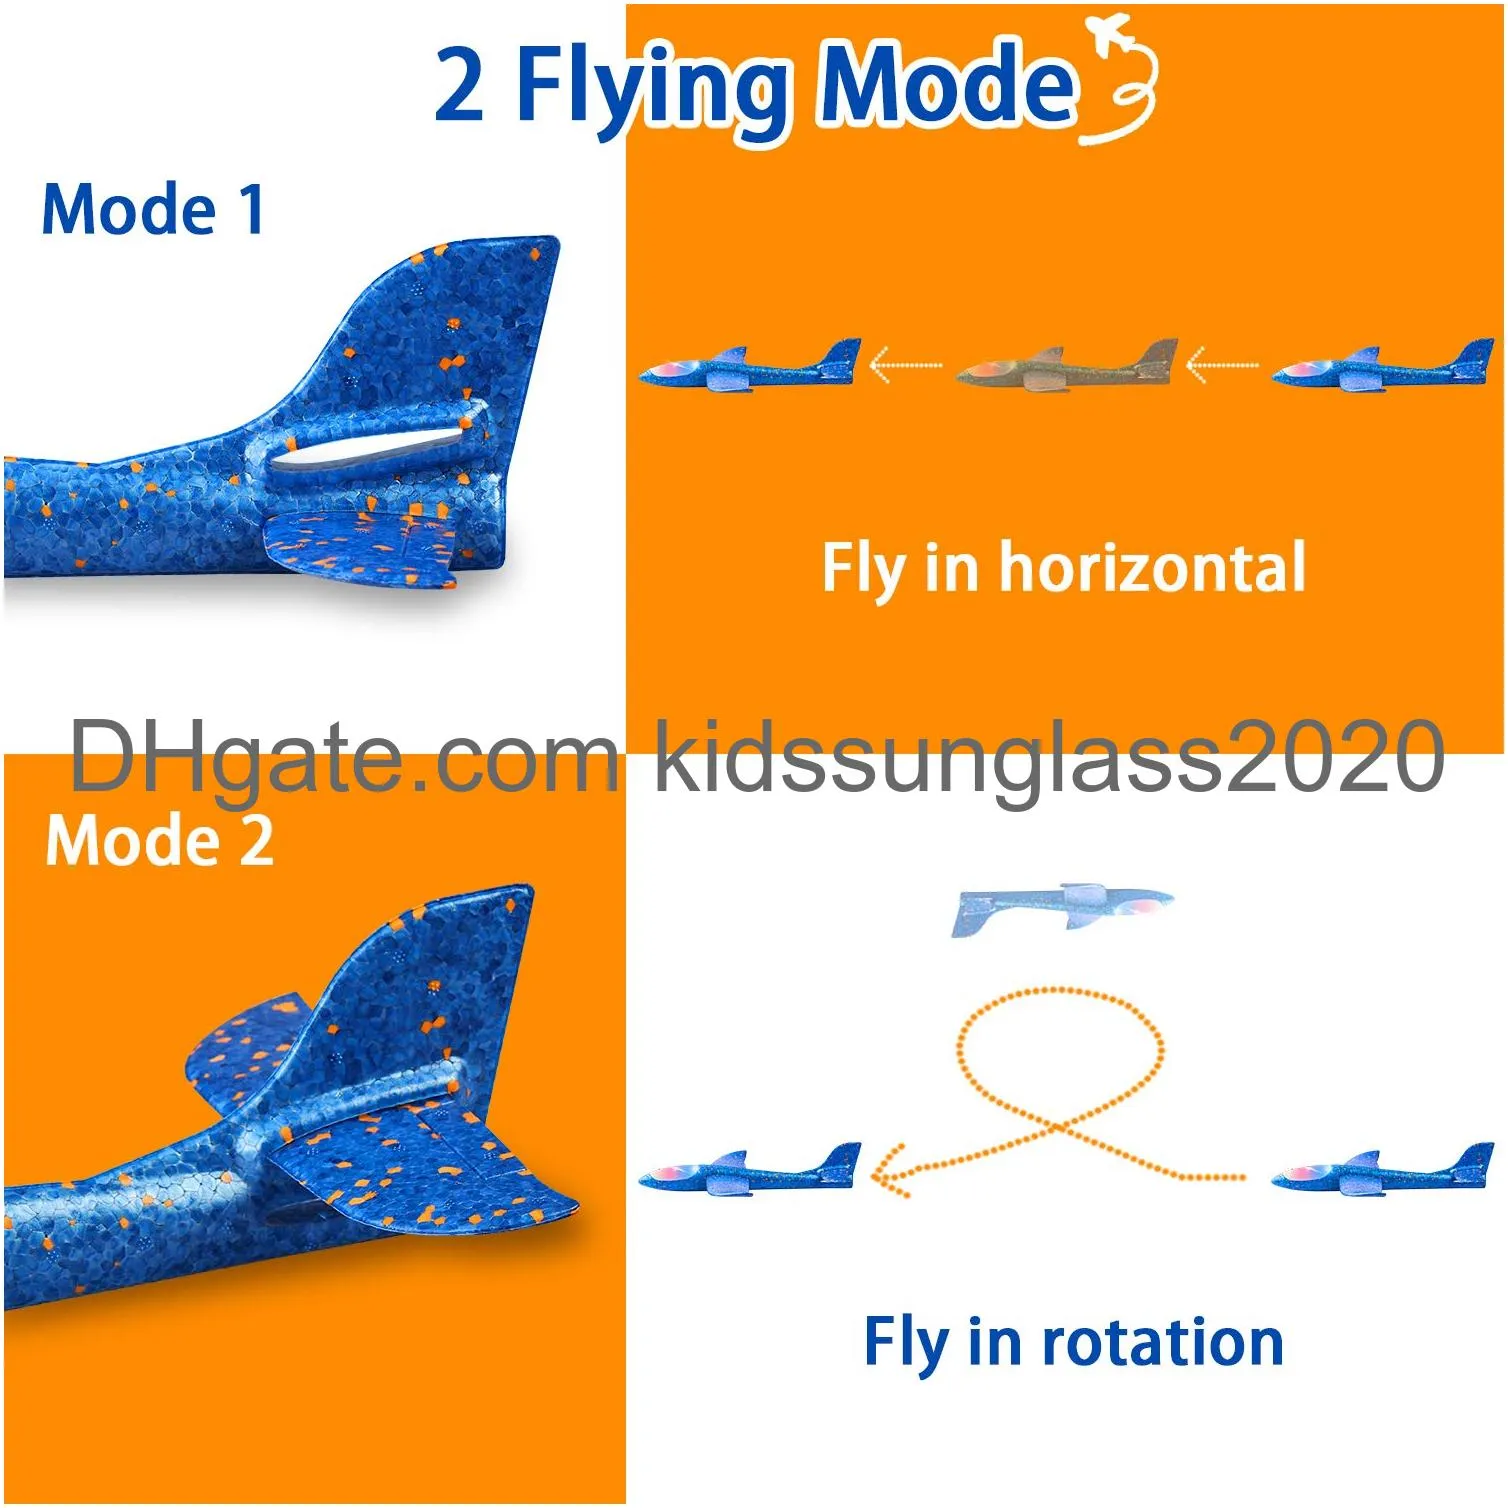 led light airplane 17.5 large throwing foam plane 2 flight mode glider plane flying toy for kids gifts for 3 4 5 6 7 8 9 years old boy outdoor sport toys birthday party favors foam airplane